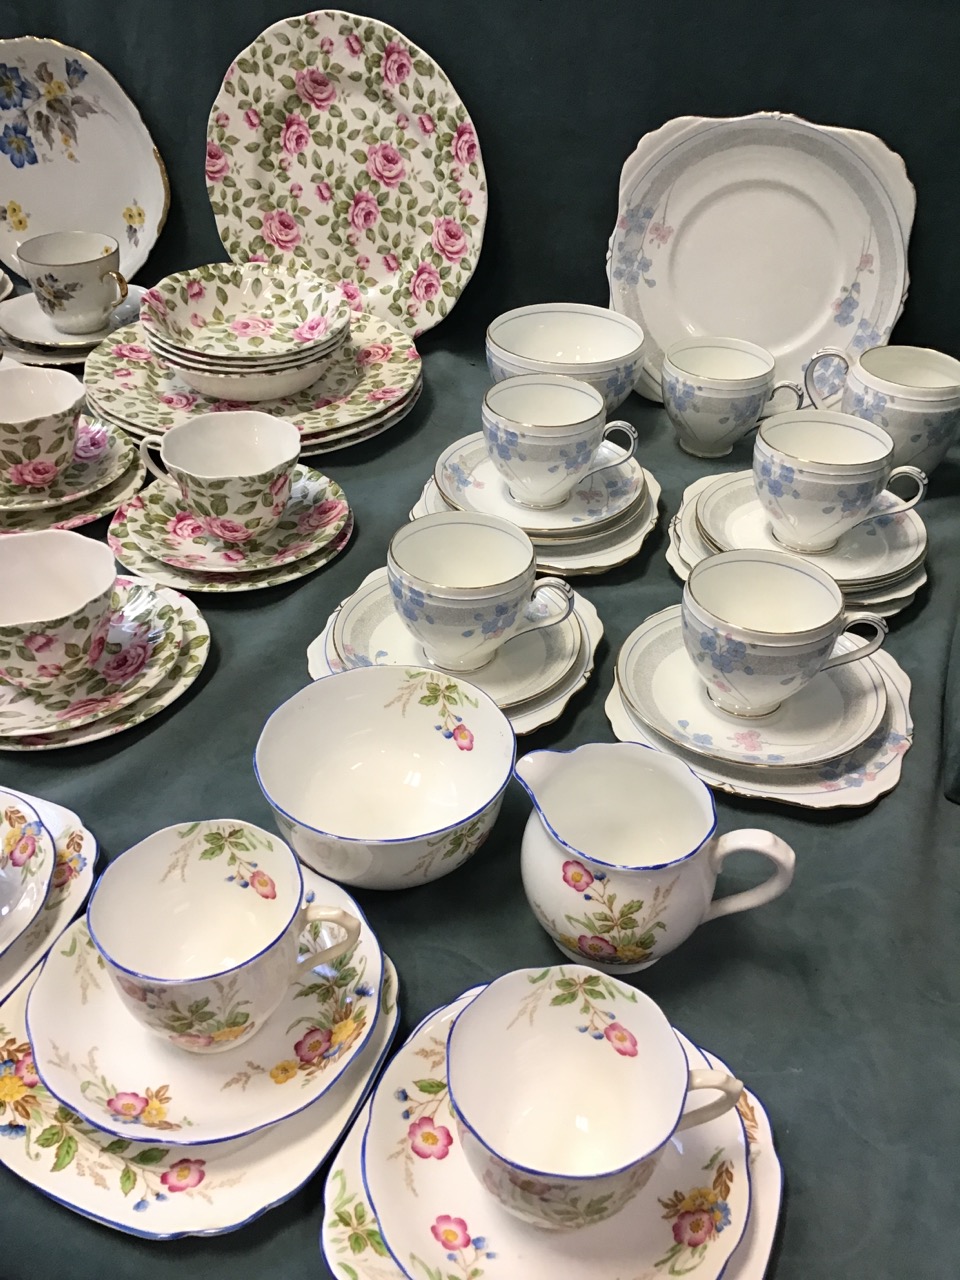 Miscellaneous tea services - Grafton in the Royston pattern, Durham China decorated with gentians, - Image 3 of 3